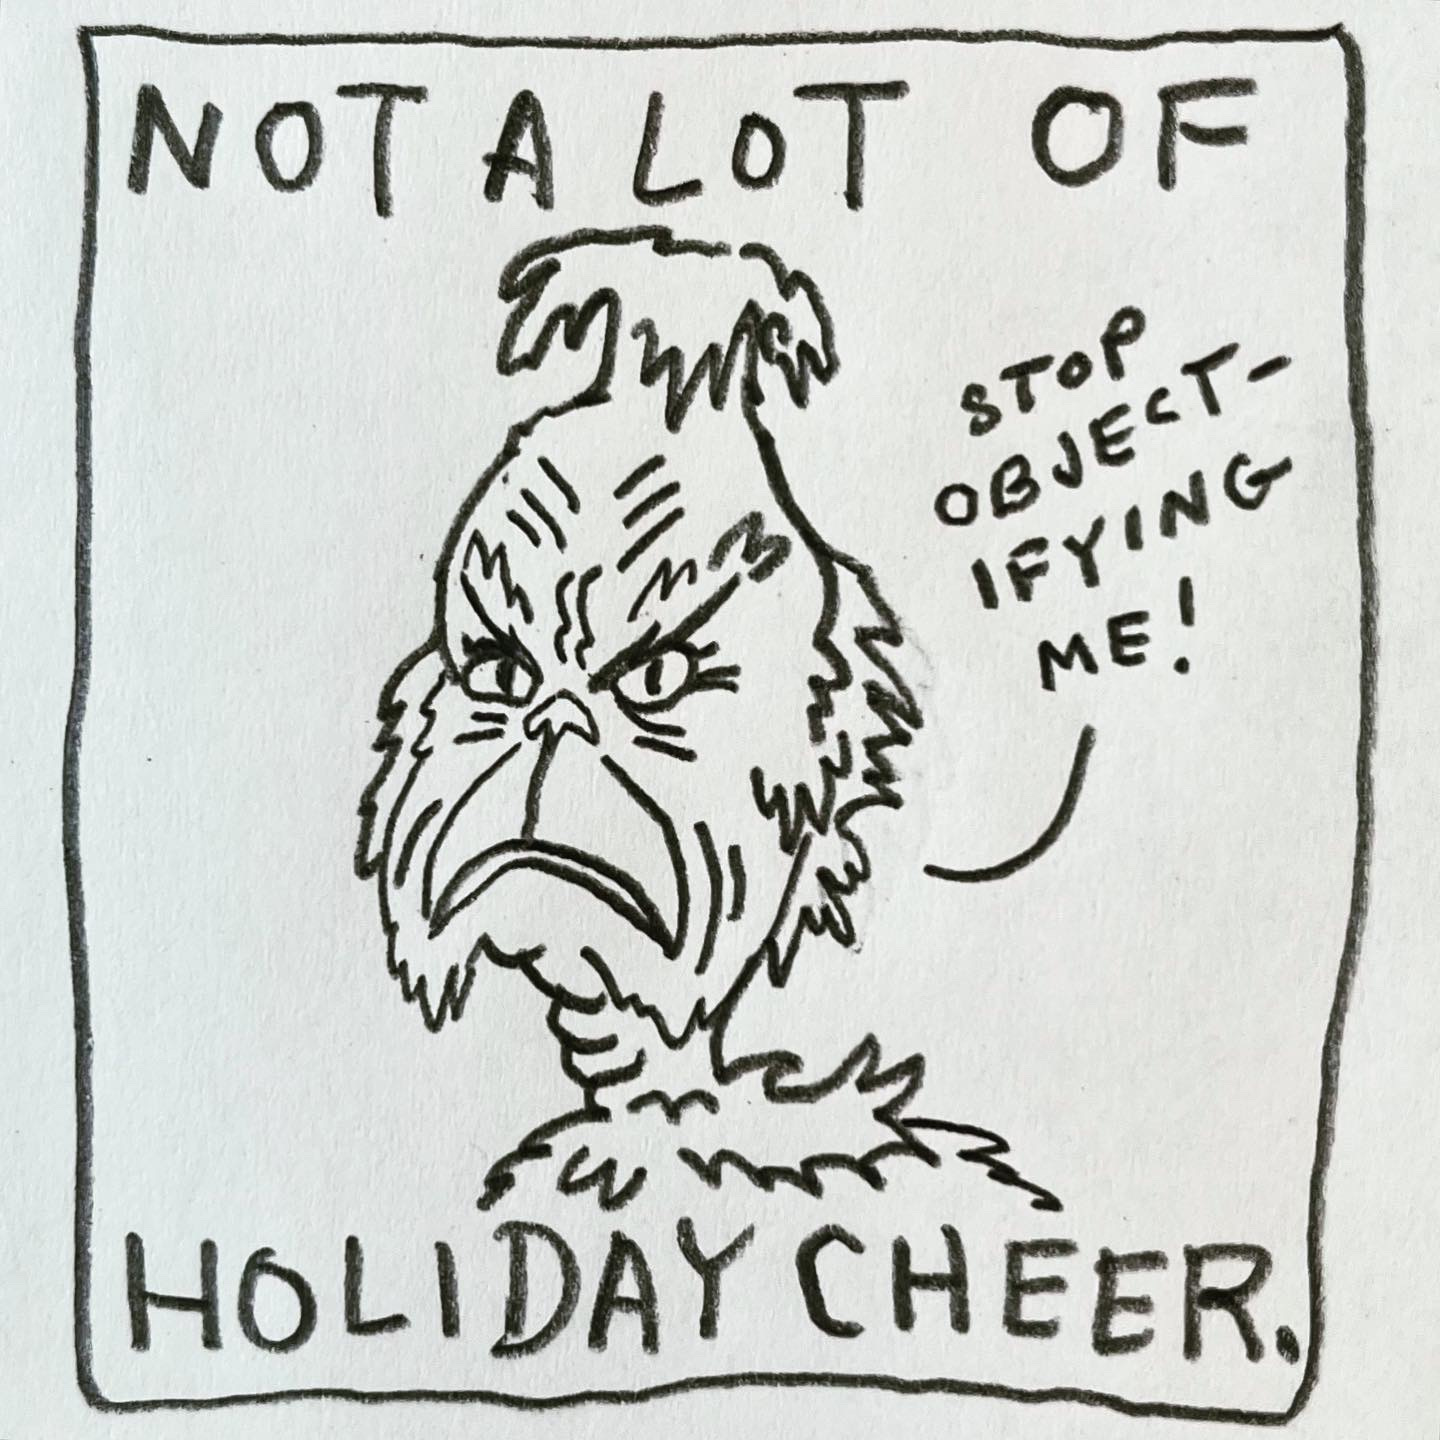 Panel 4: not a lot of holiday cheer. Image: A portrait of the Grinch, frowning and looking at the viewer, insisting, "stop objectifying me!"